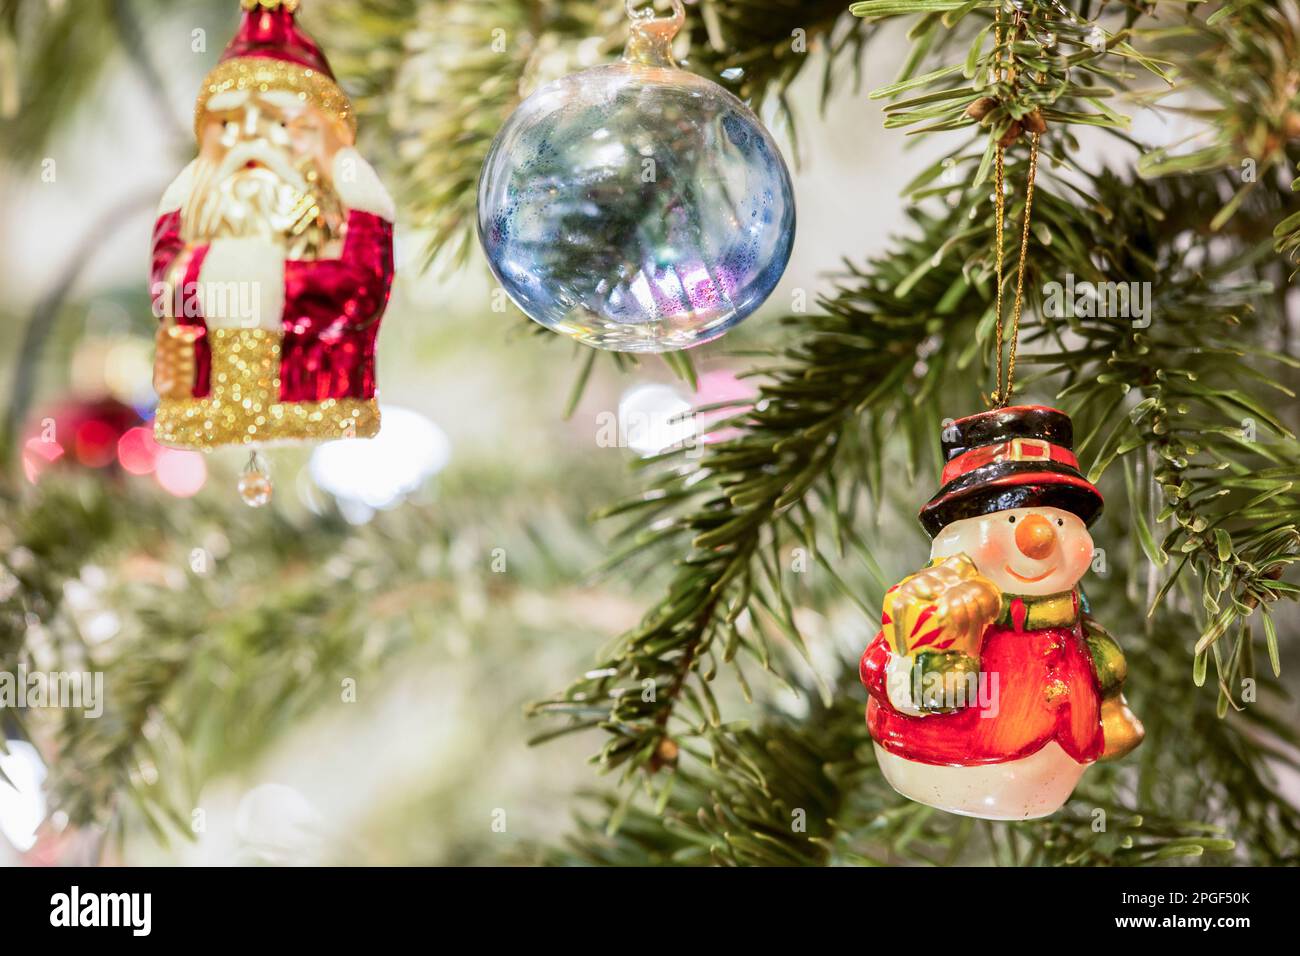 Christmas baubles and Santa Claus hanging on Christmas tree, Munich, Germany Stock Photo